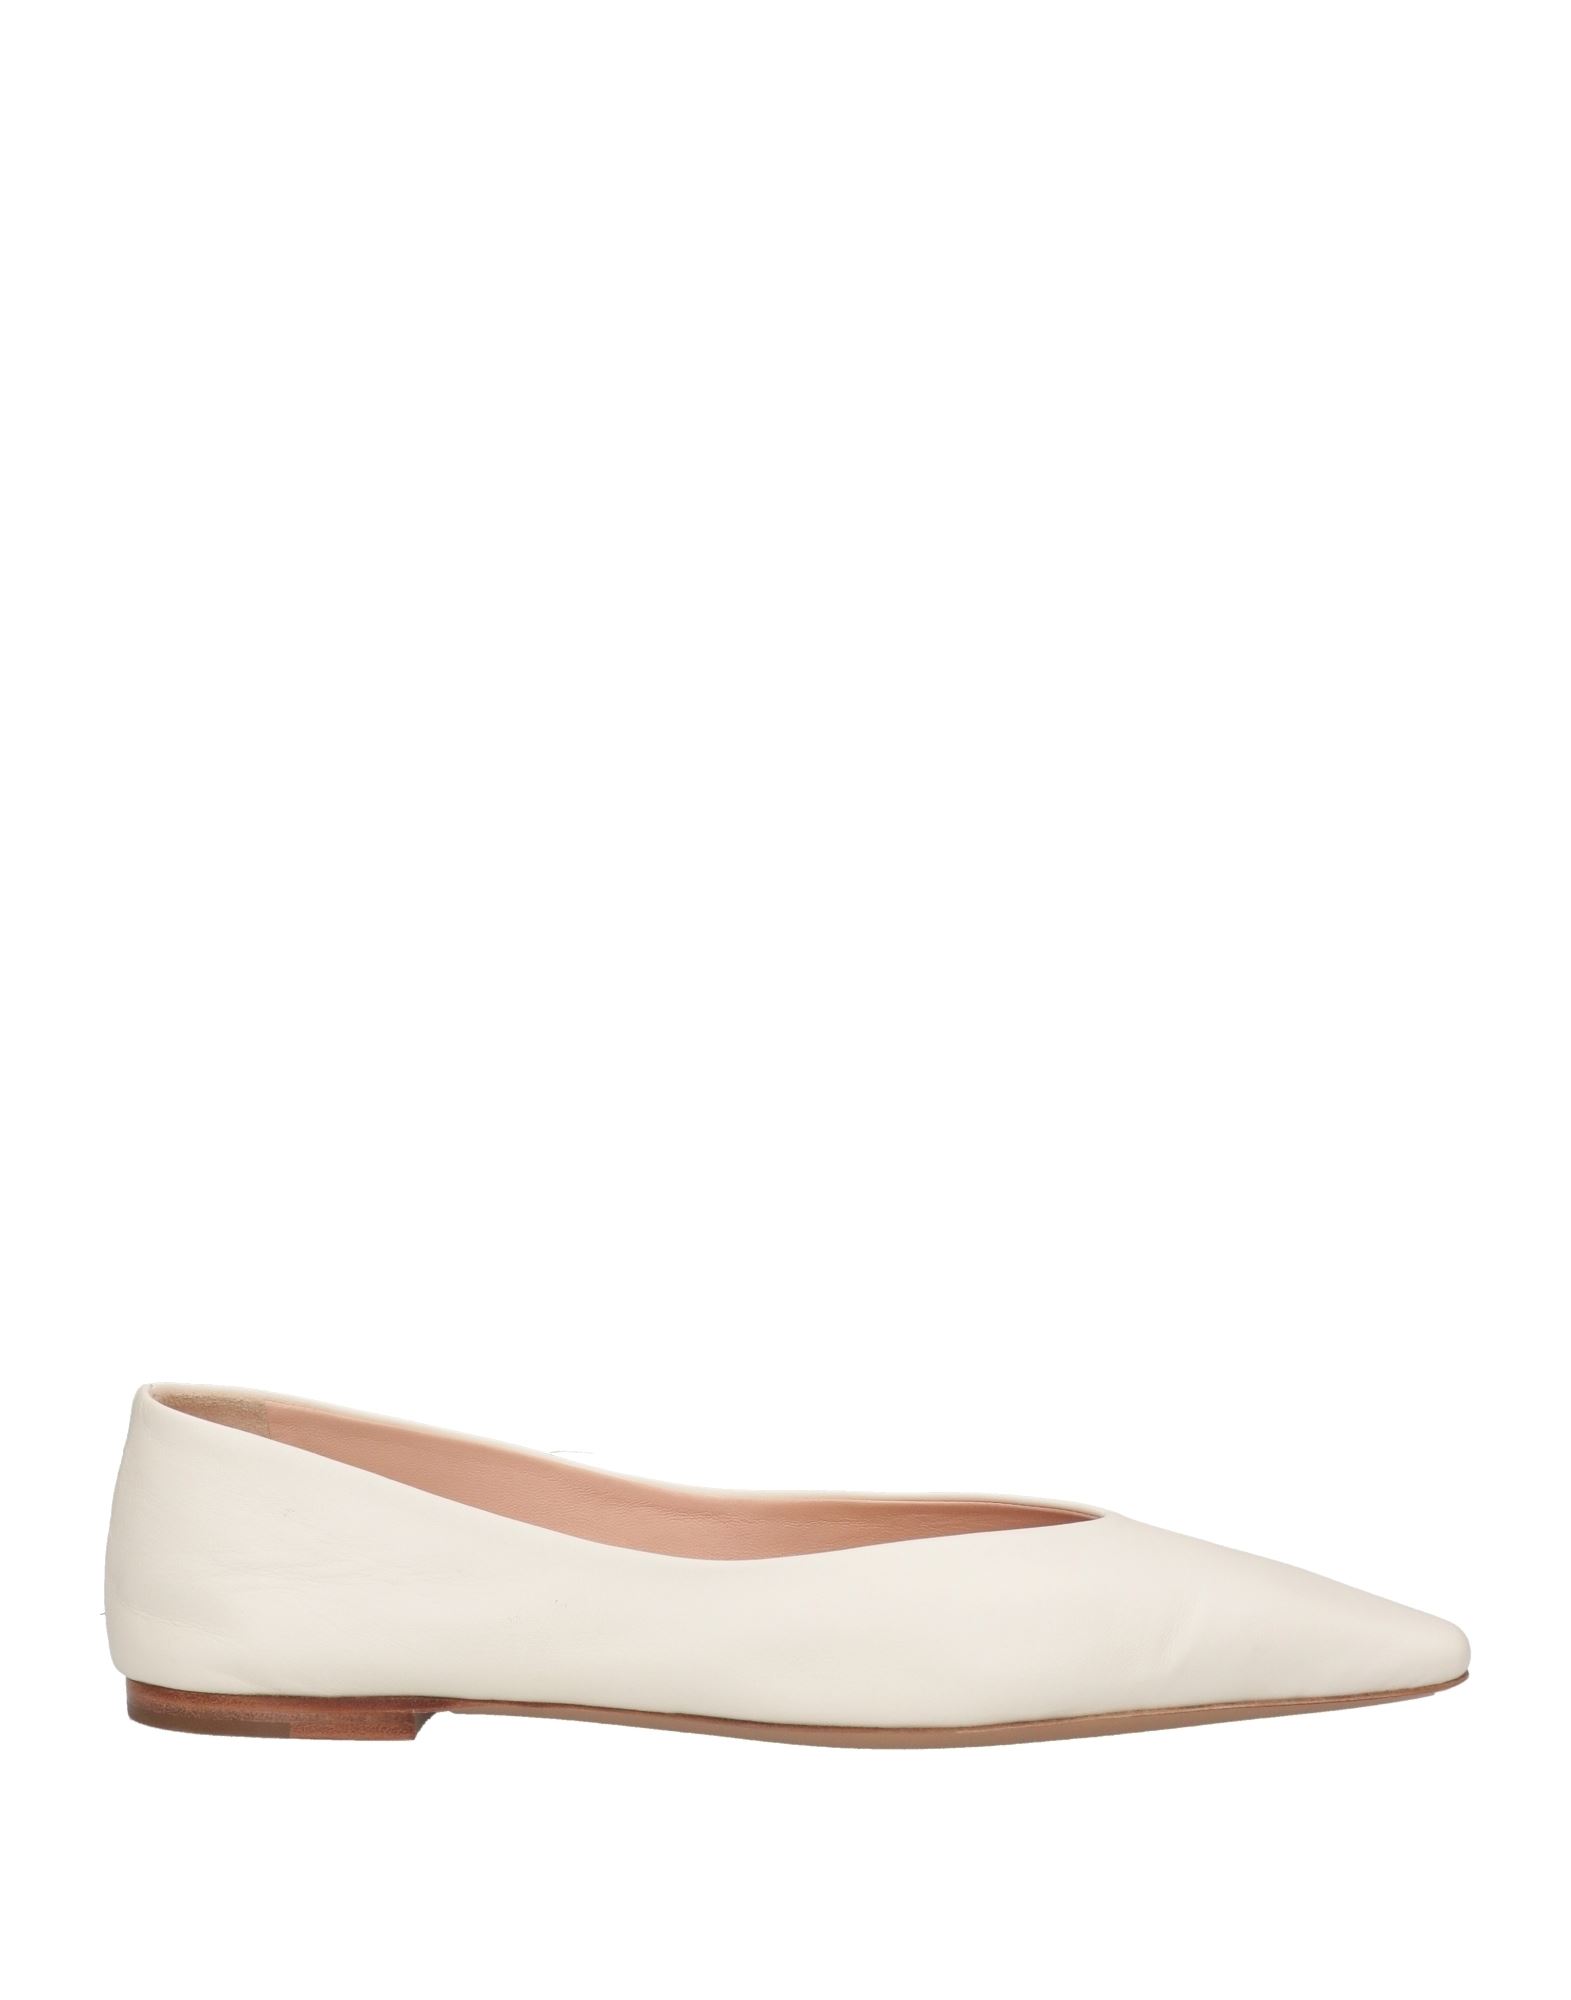 Brock Collection Ballet Flats In White